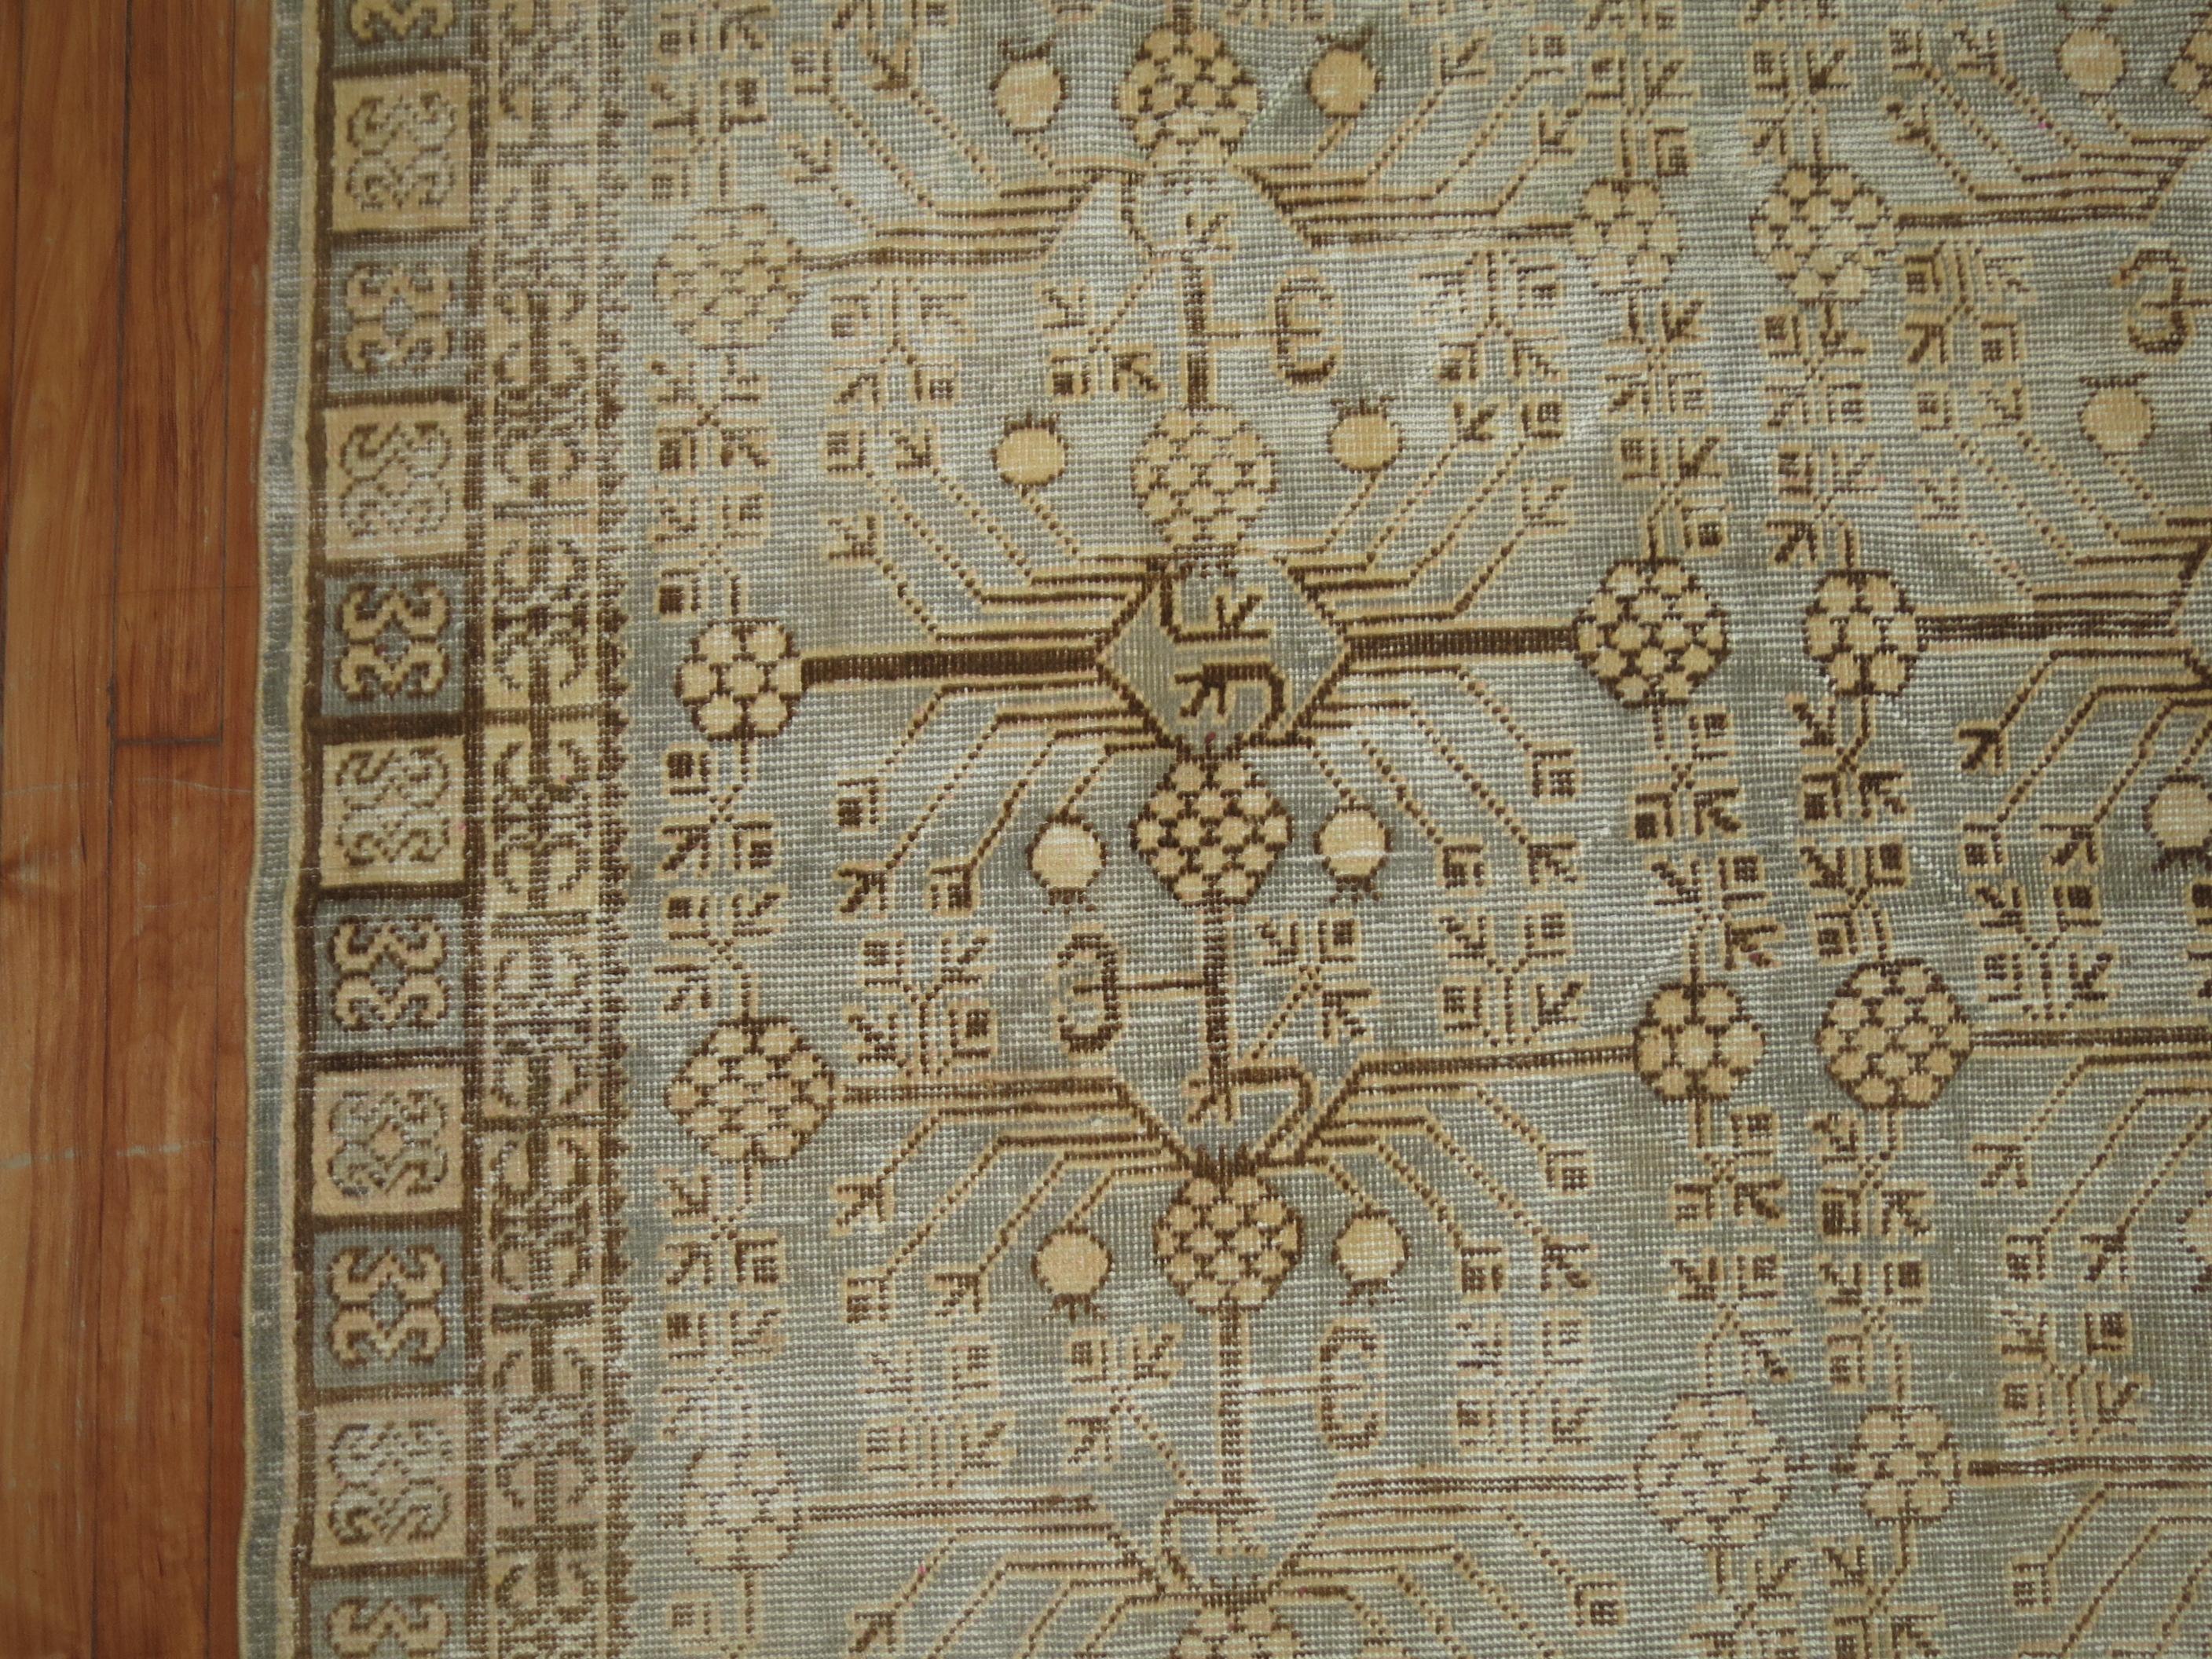 Early 20th Century Khotan Rug in Celadon Green and Brown